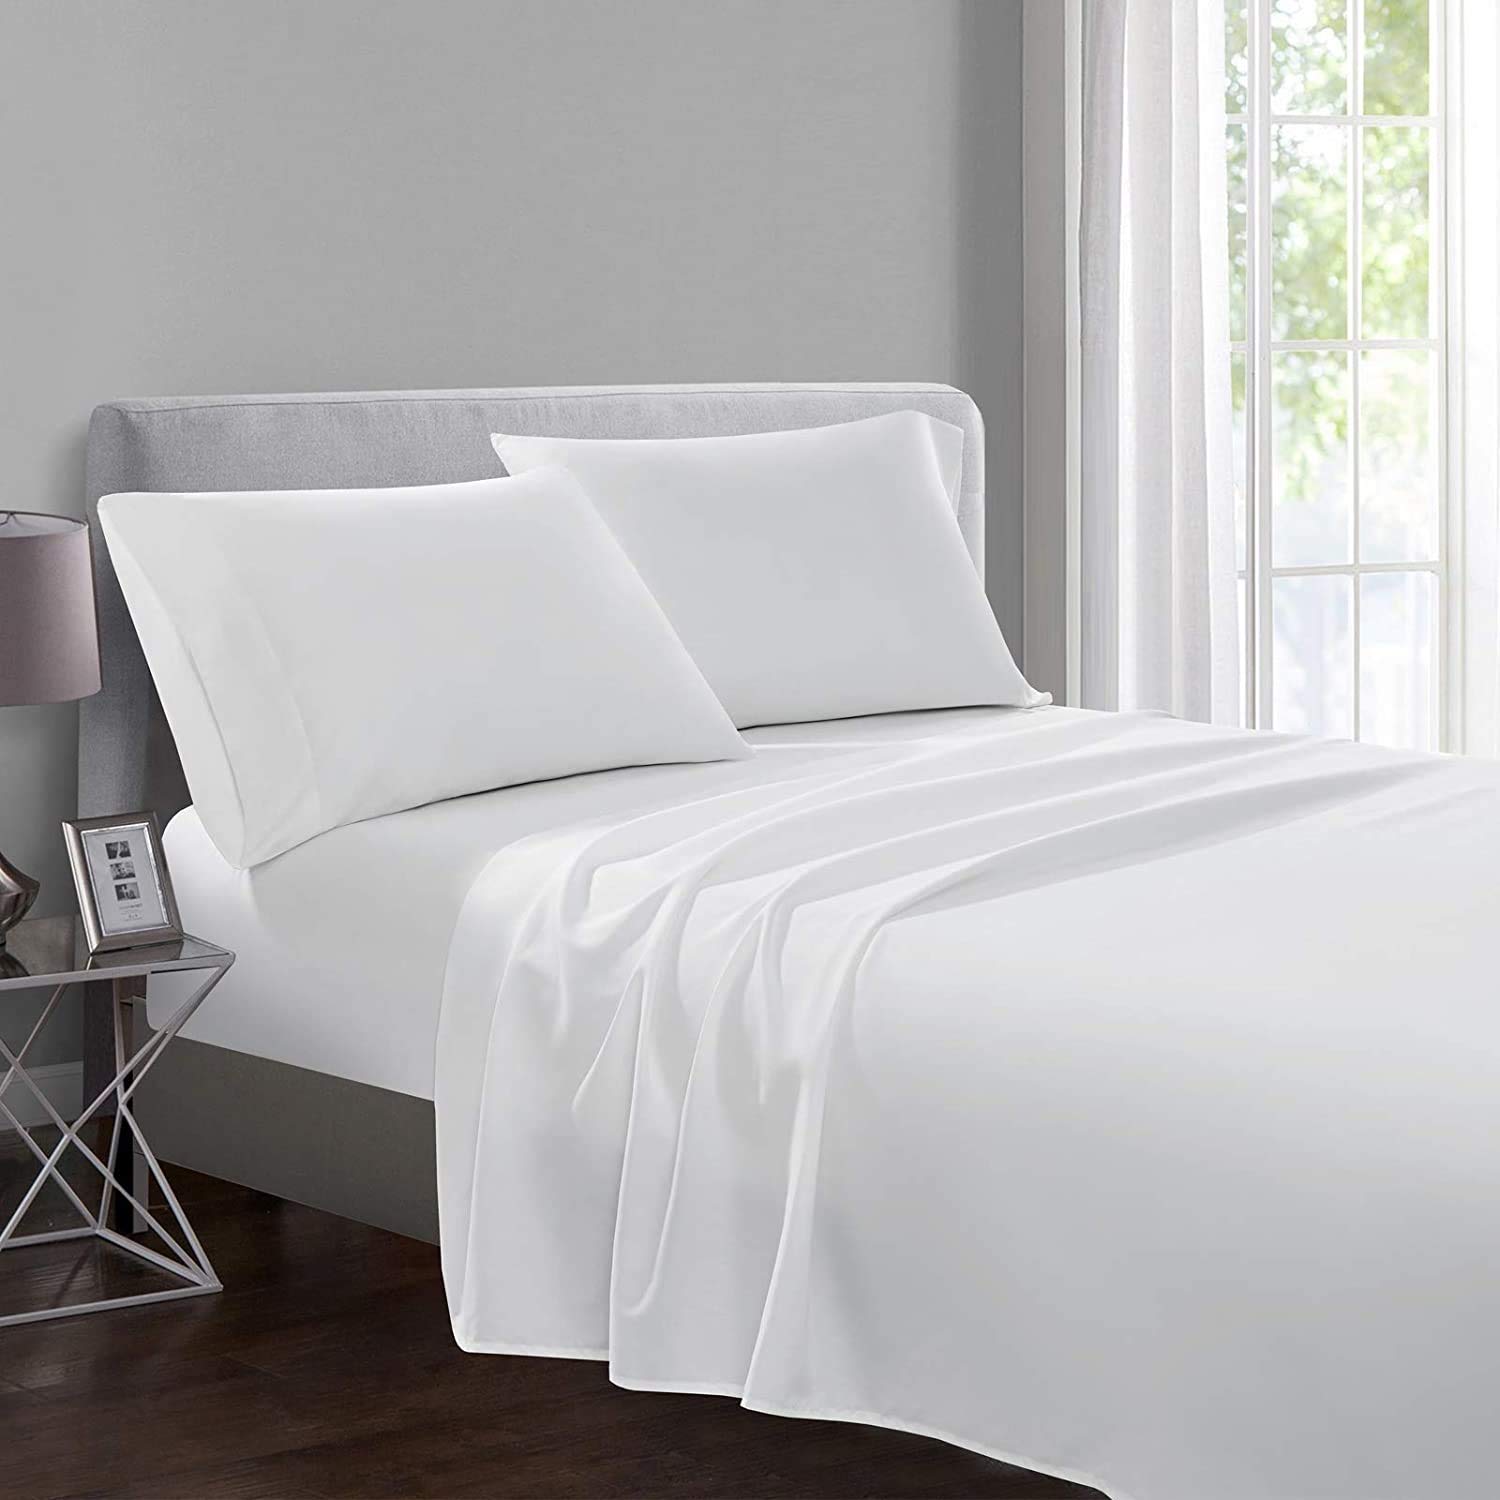 Utopia Bedding Flat Sheets - Pack of 6 - Soft Brushed Microfiber